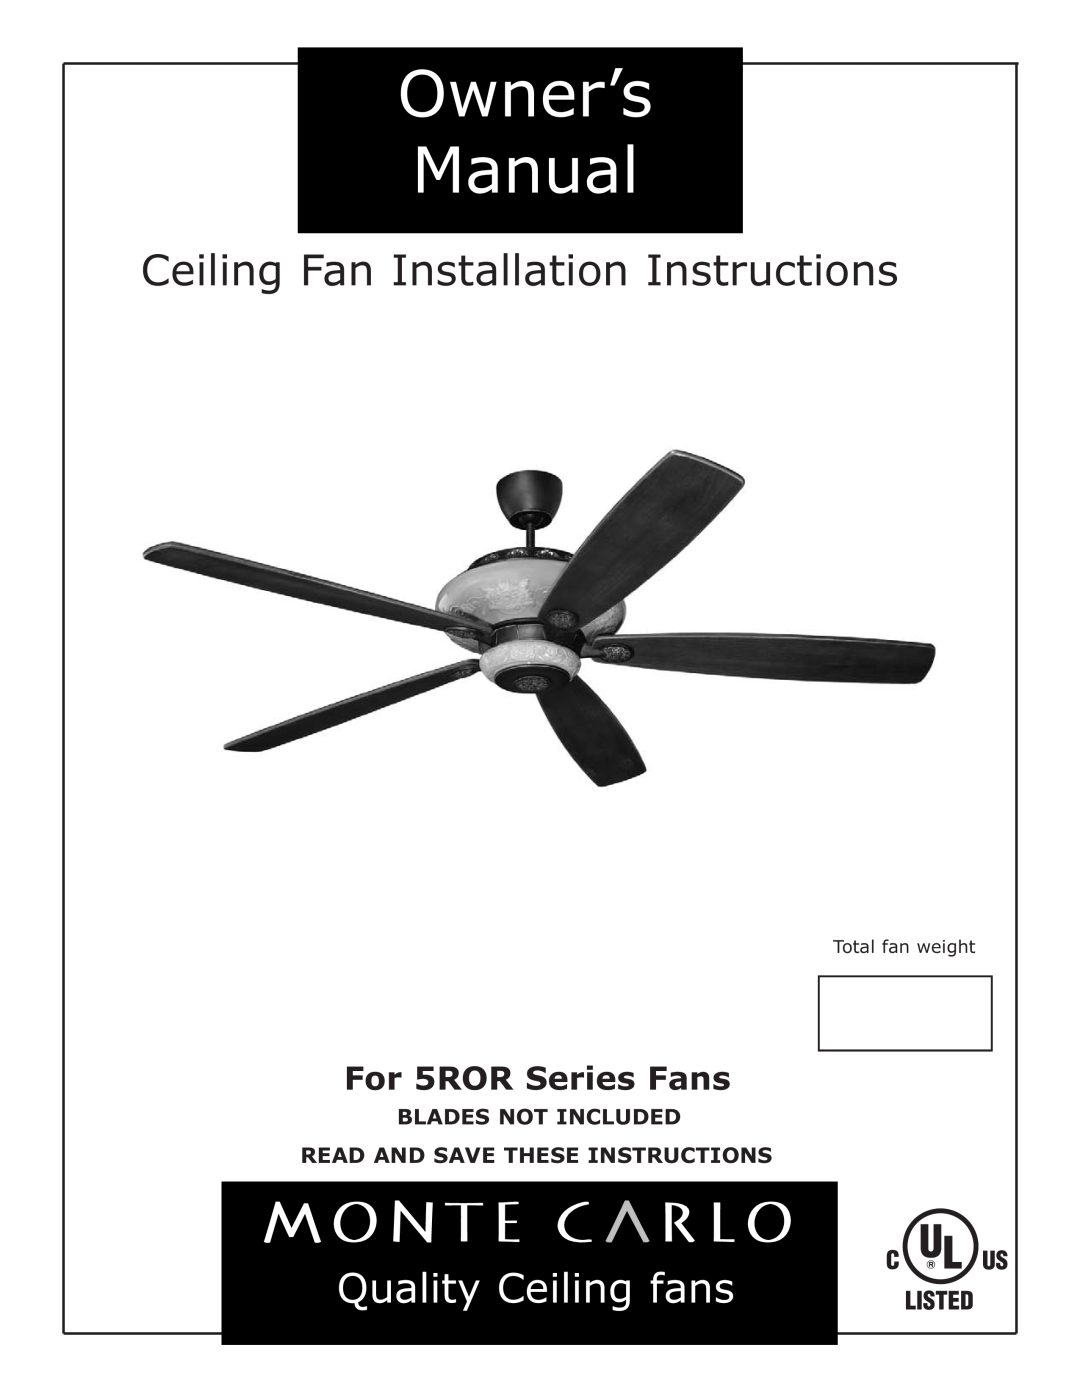 Monte Carlo Fan Company 5ROR owner manual Ceiling Fan Installation Instructions, Quality Ceiling fans, Blades Not Included 